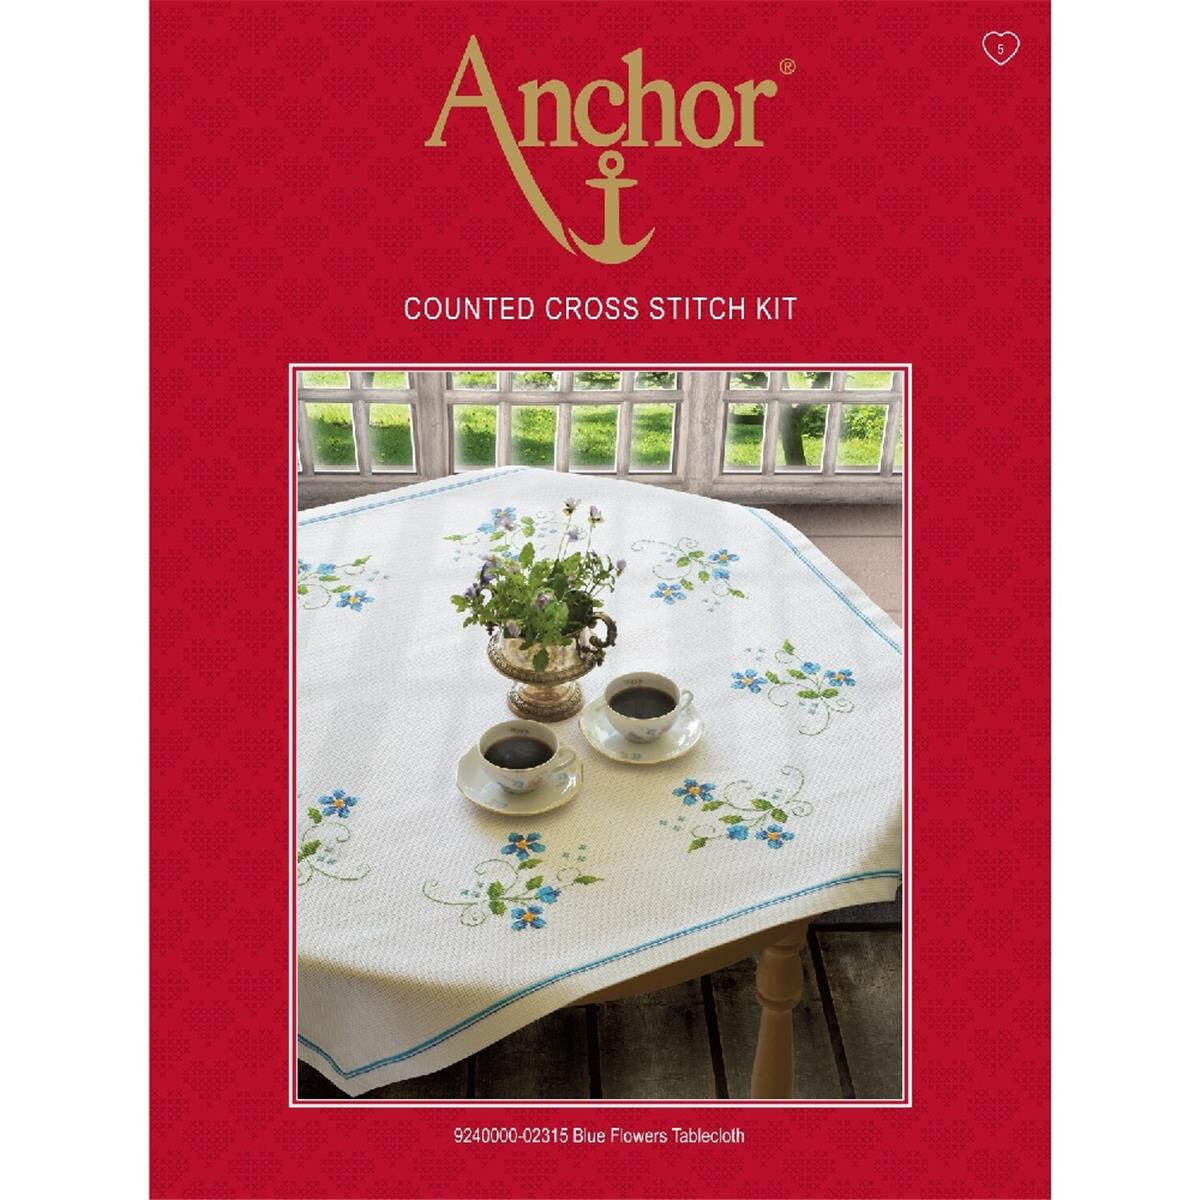 Anchor counted Cross Stitch kit Tablecloth "Blue...